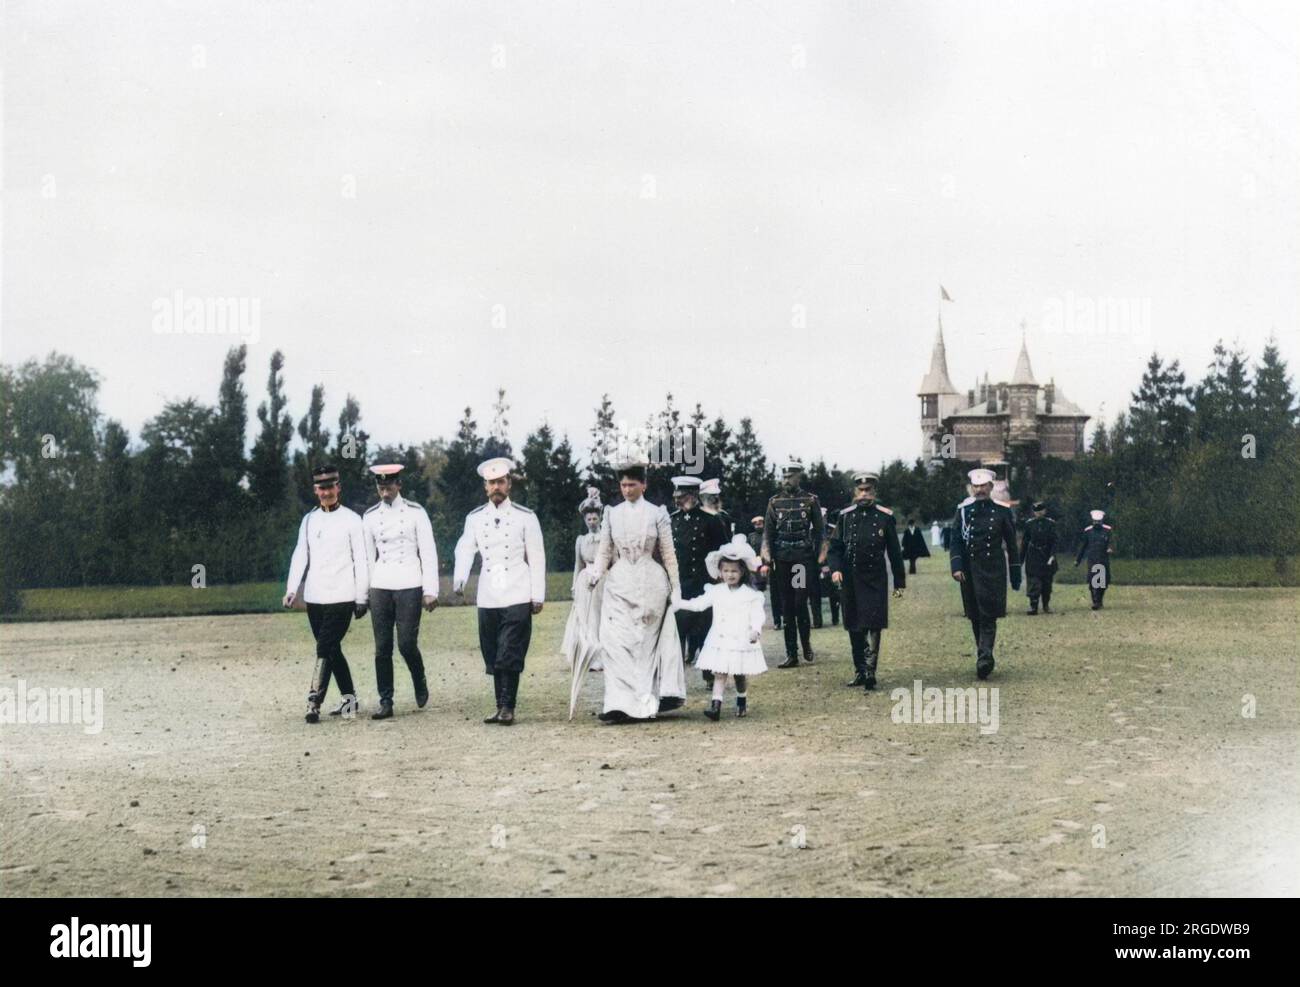 Tsar Nicholas II of Russia walking through the countryside at Krasnoe Selo among a large entourage that includes his wife Alexandra Feodorovna, one of his daughters, other family members and several officials. Stock Photo